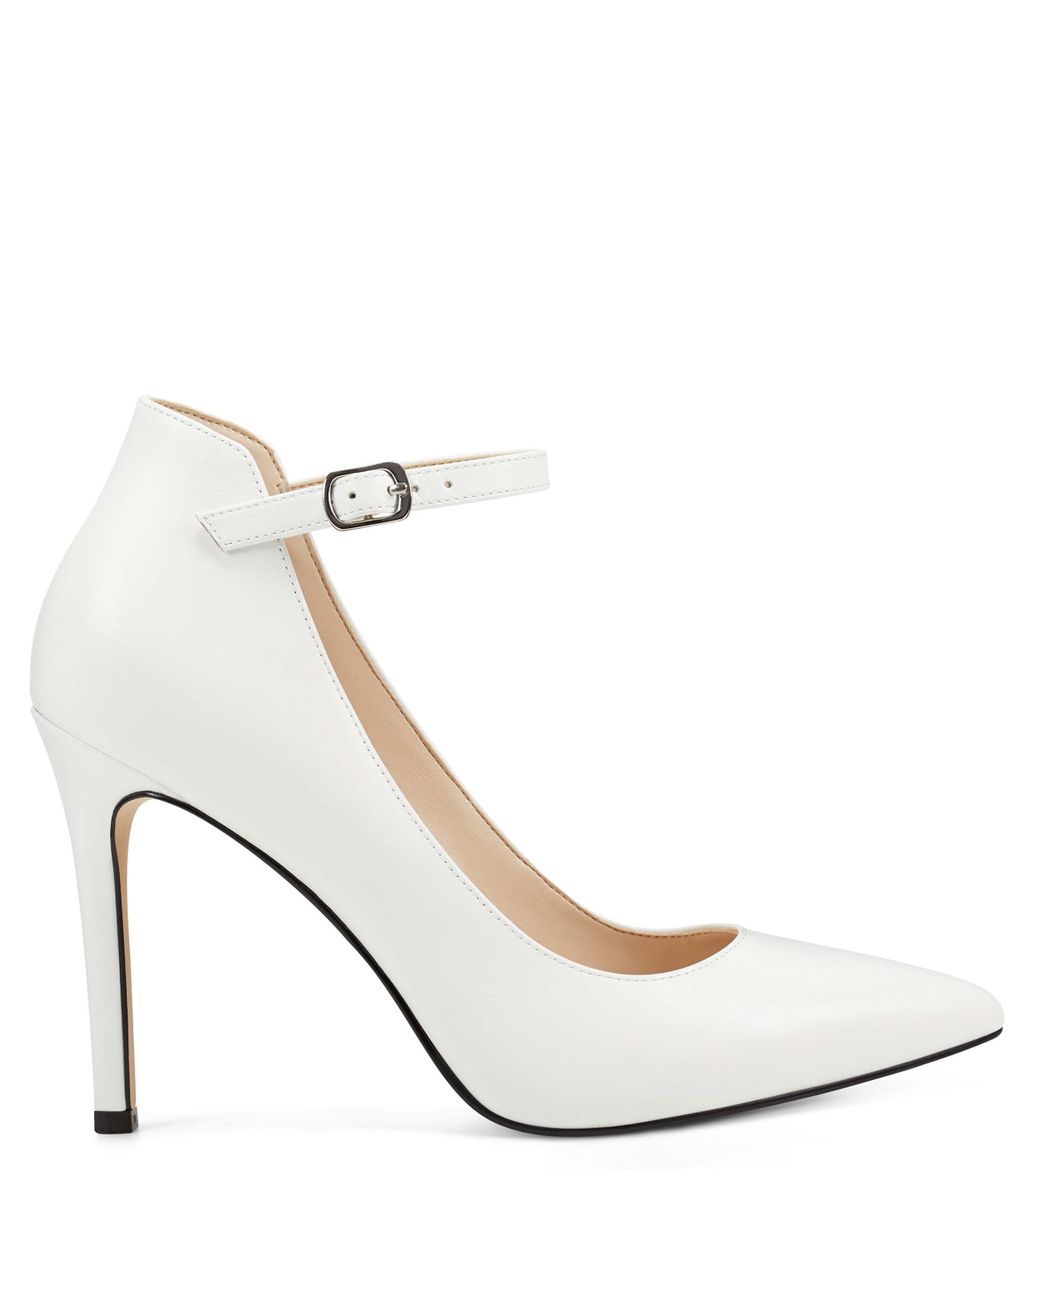 Nine West Tressa Ankle Strap Pumps in White Leather (White) - Lyst